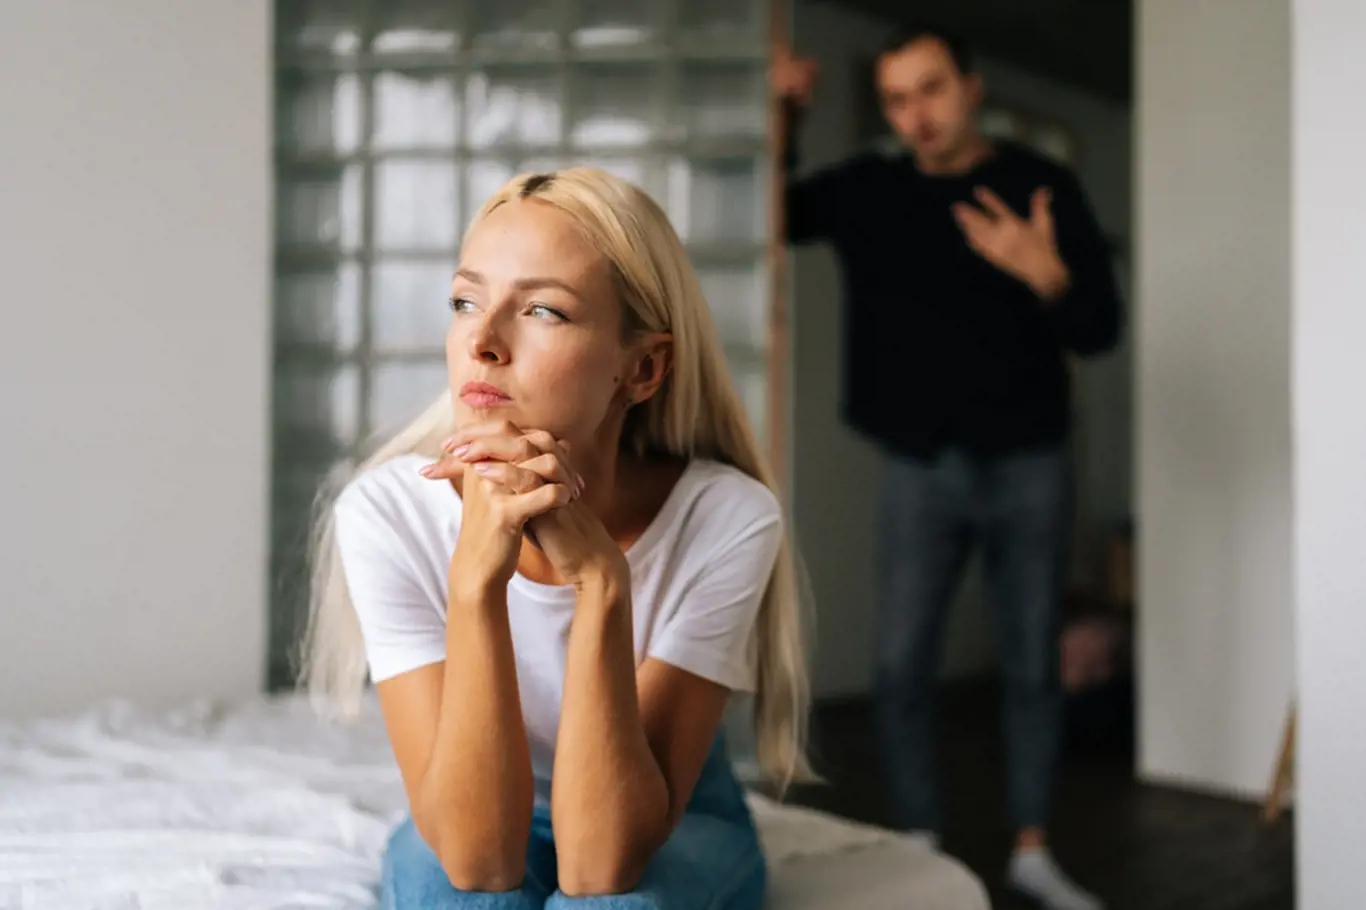 Portrait of tired stressed woman sadness looking away sitting on bed on blurred background of aggressive husband shouting on wife at home. Concept of family scandal, crisis, domestic violence, abuse.